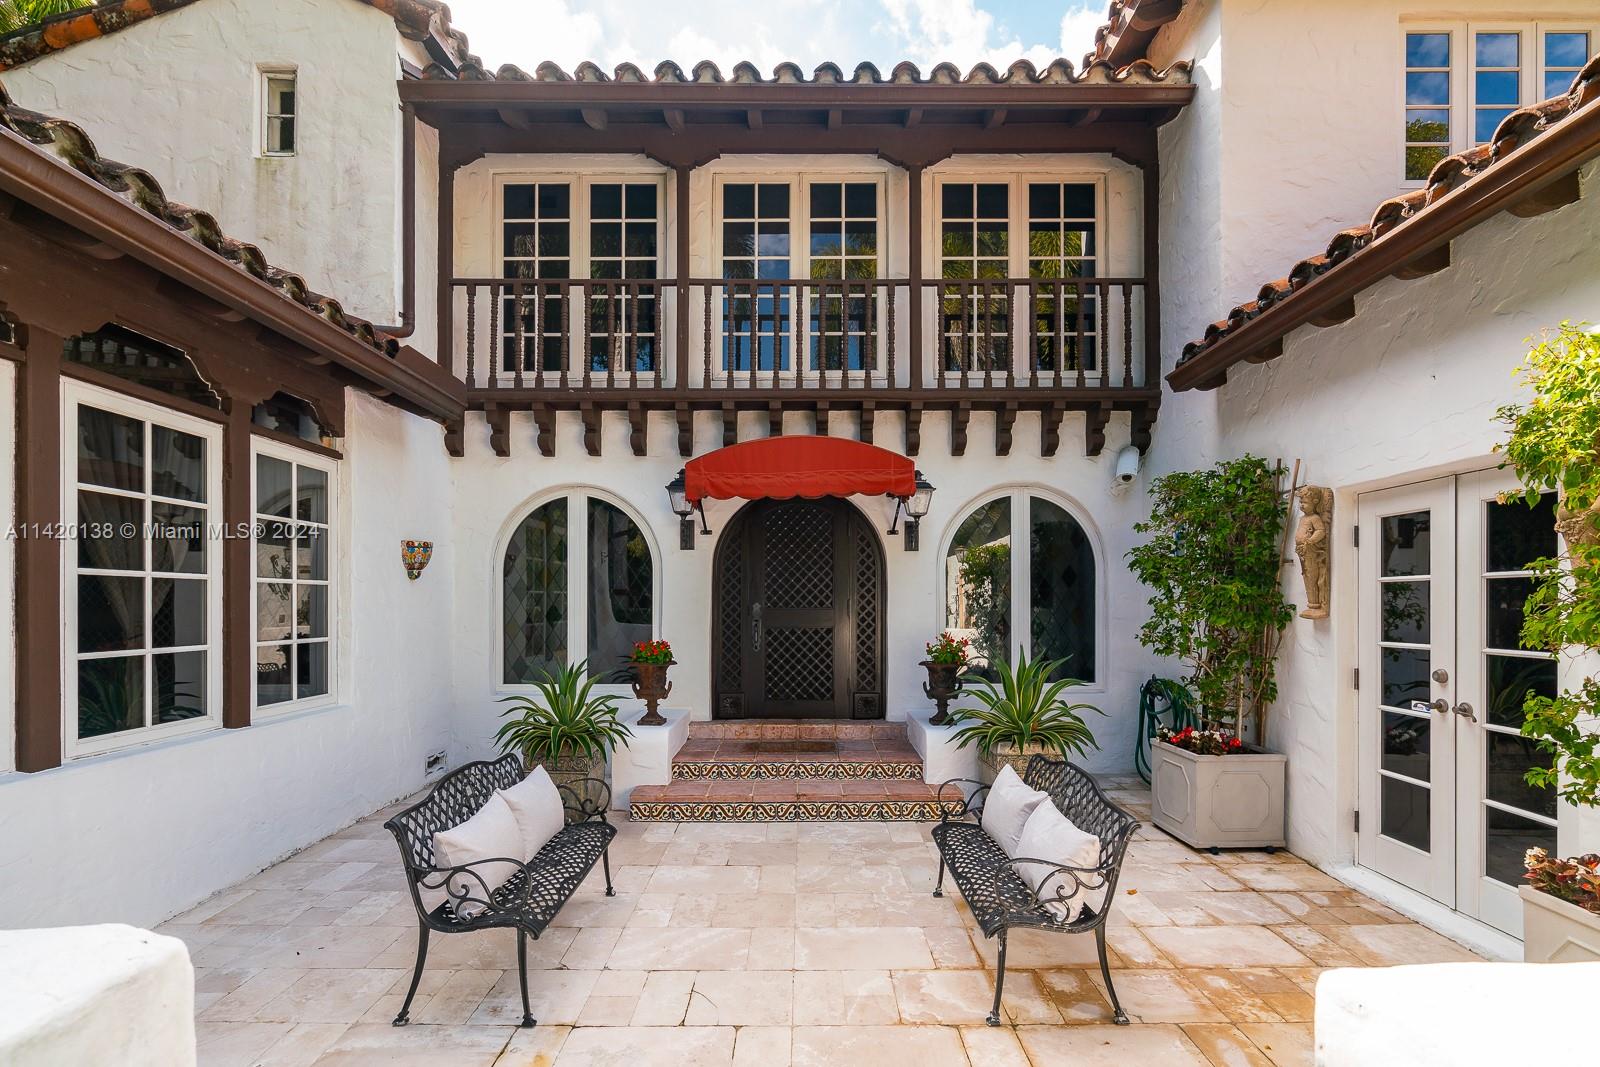 This utterly charming, fully and properly restored 1920's Old Spanish style villa with 6397 actual square feet (5044 living area) on a 15,750 sq ft lot will bedazzle all who appreciate classical architecture with its loggia, Palladian window frames, high timber beamed ceilings and sun-dappled courtyards. There are 6 bedrooms and 6.5 bathrooms. The primary bedroom suite and 3 other bedrooms are upstairs. There is a guest bedroom and a maid's bedroom on the 1st floor. There is a Summer kitchen and a large billiard or play room by the heated pool. The home is walled and gated and within easy walking distance to the Biltmore Hotel, Venetian Pool and Salvadore Park. The home has a 2-car garage and impact doors and windows throughout. The home was designated as a Coral Gables Landmark in 1999.